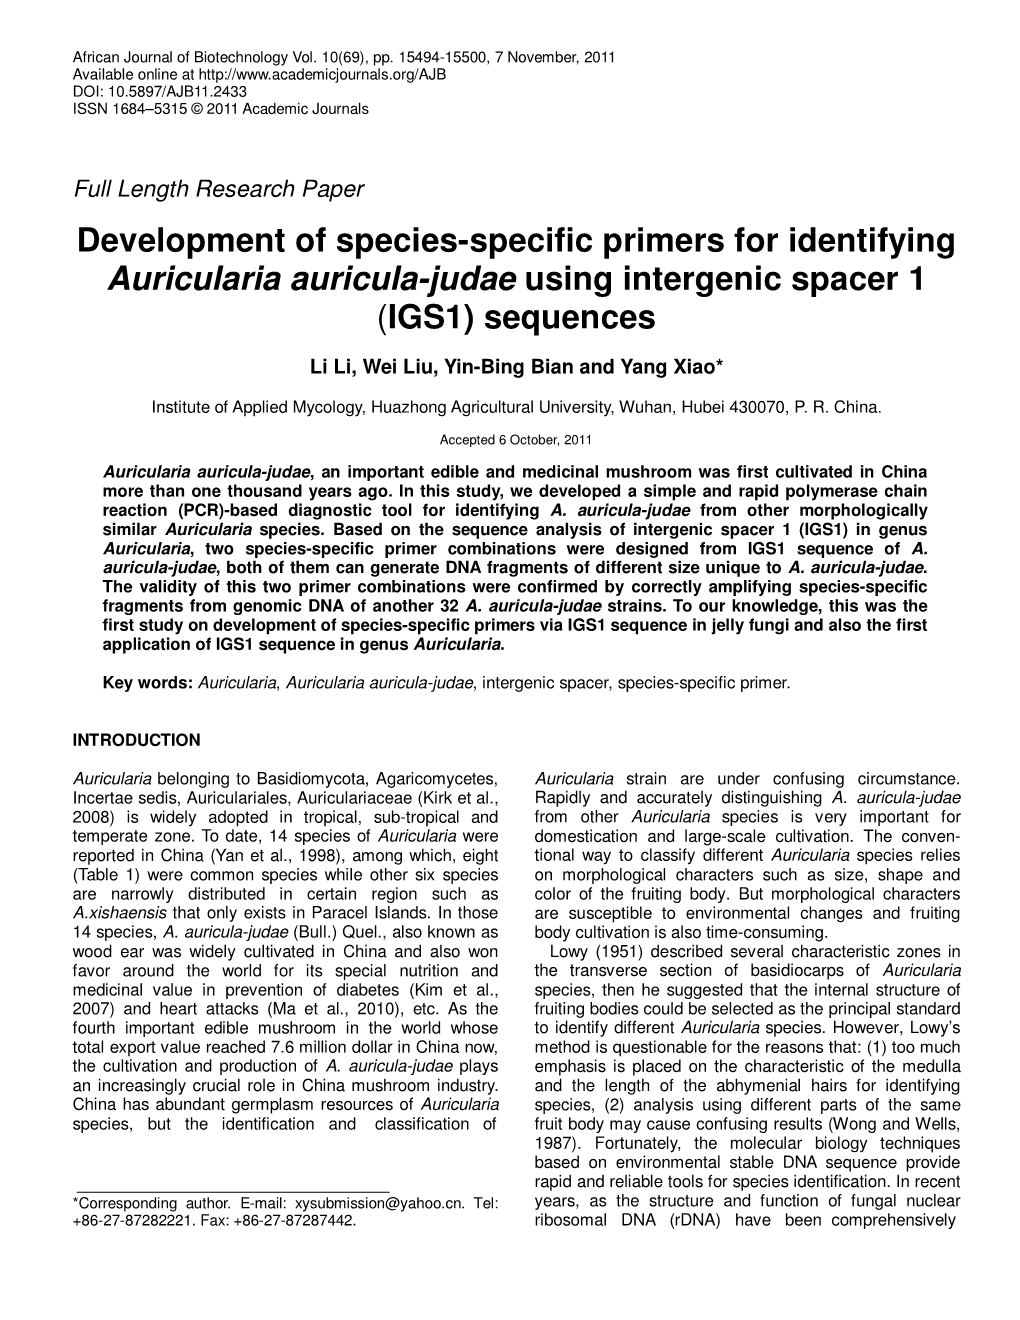 Development of Species-Specific Primers for Identifying Auricularia Auricula-Judae Using Intergenic Spacer 1 (IGS1) Sequences